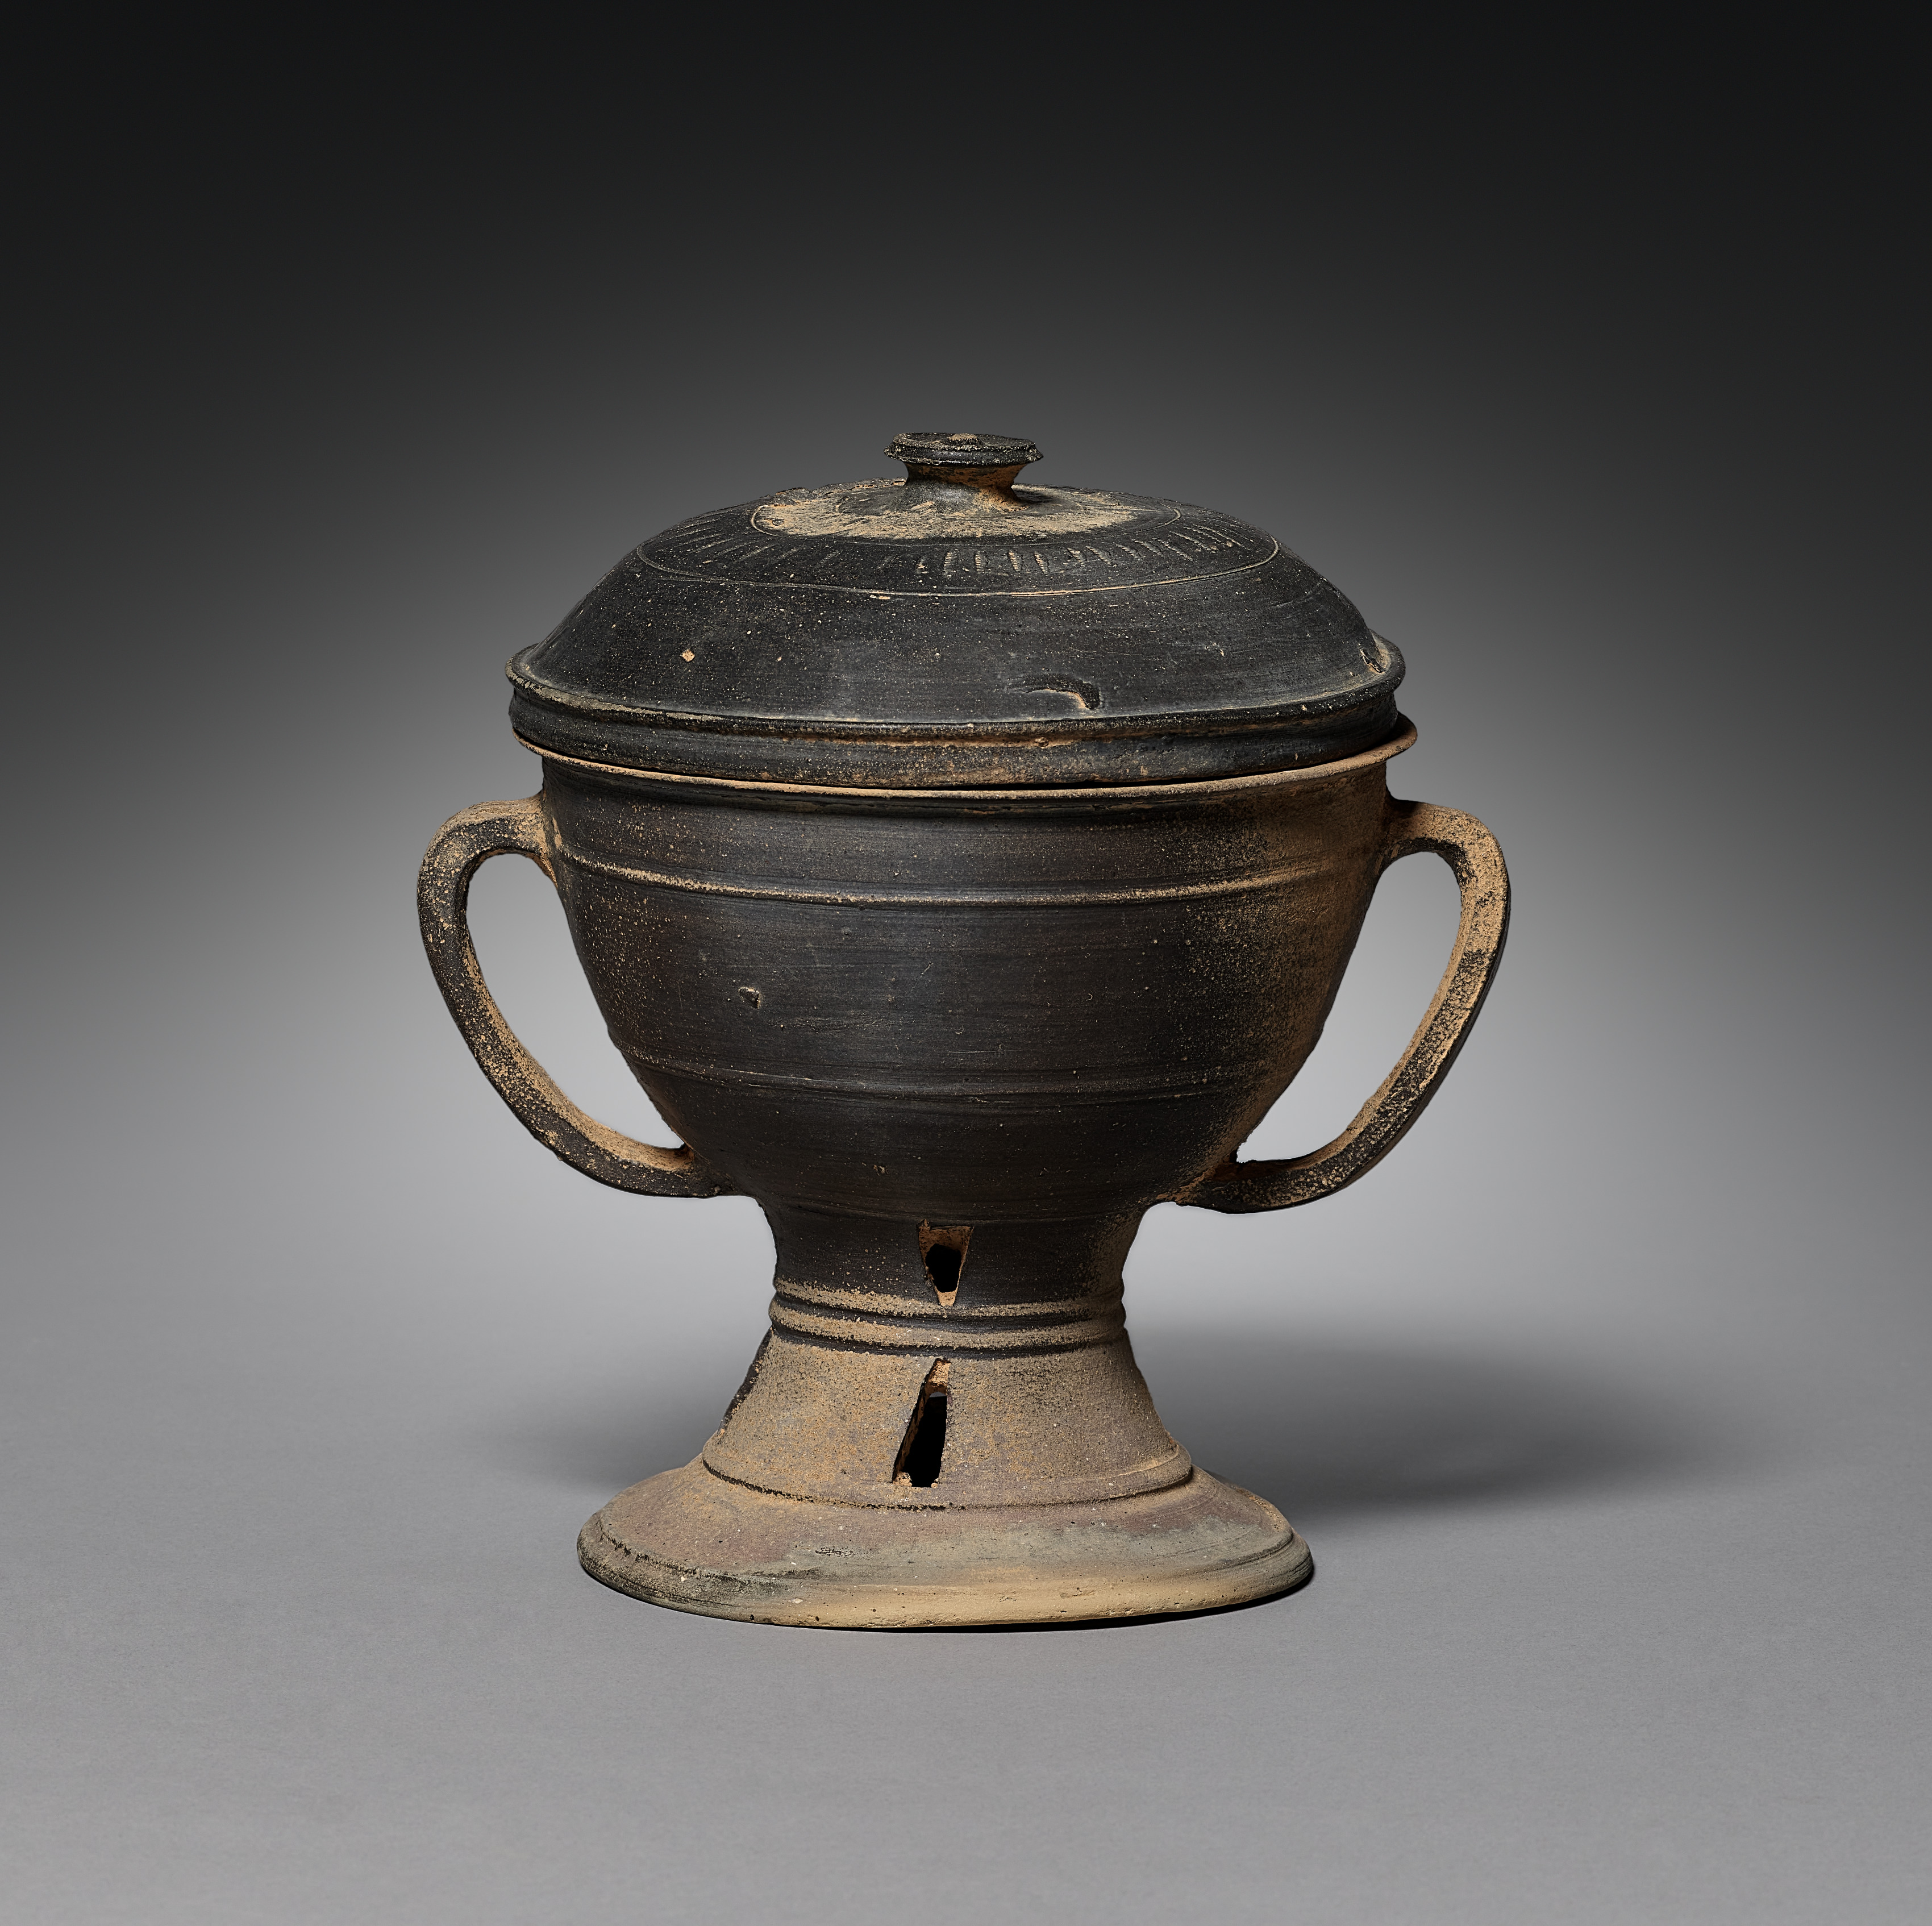 Lidded Cup with Strap Handles